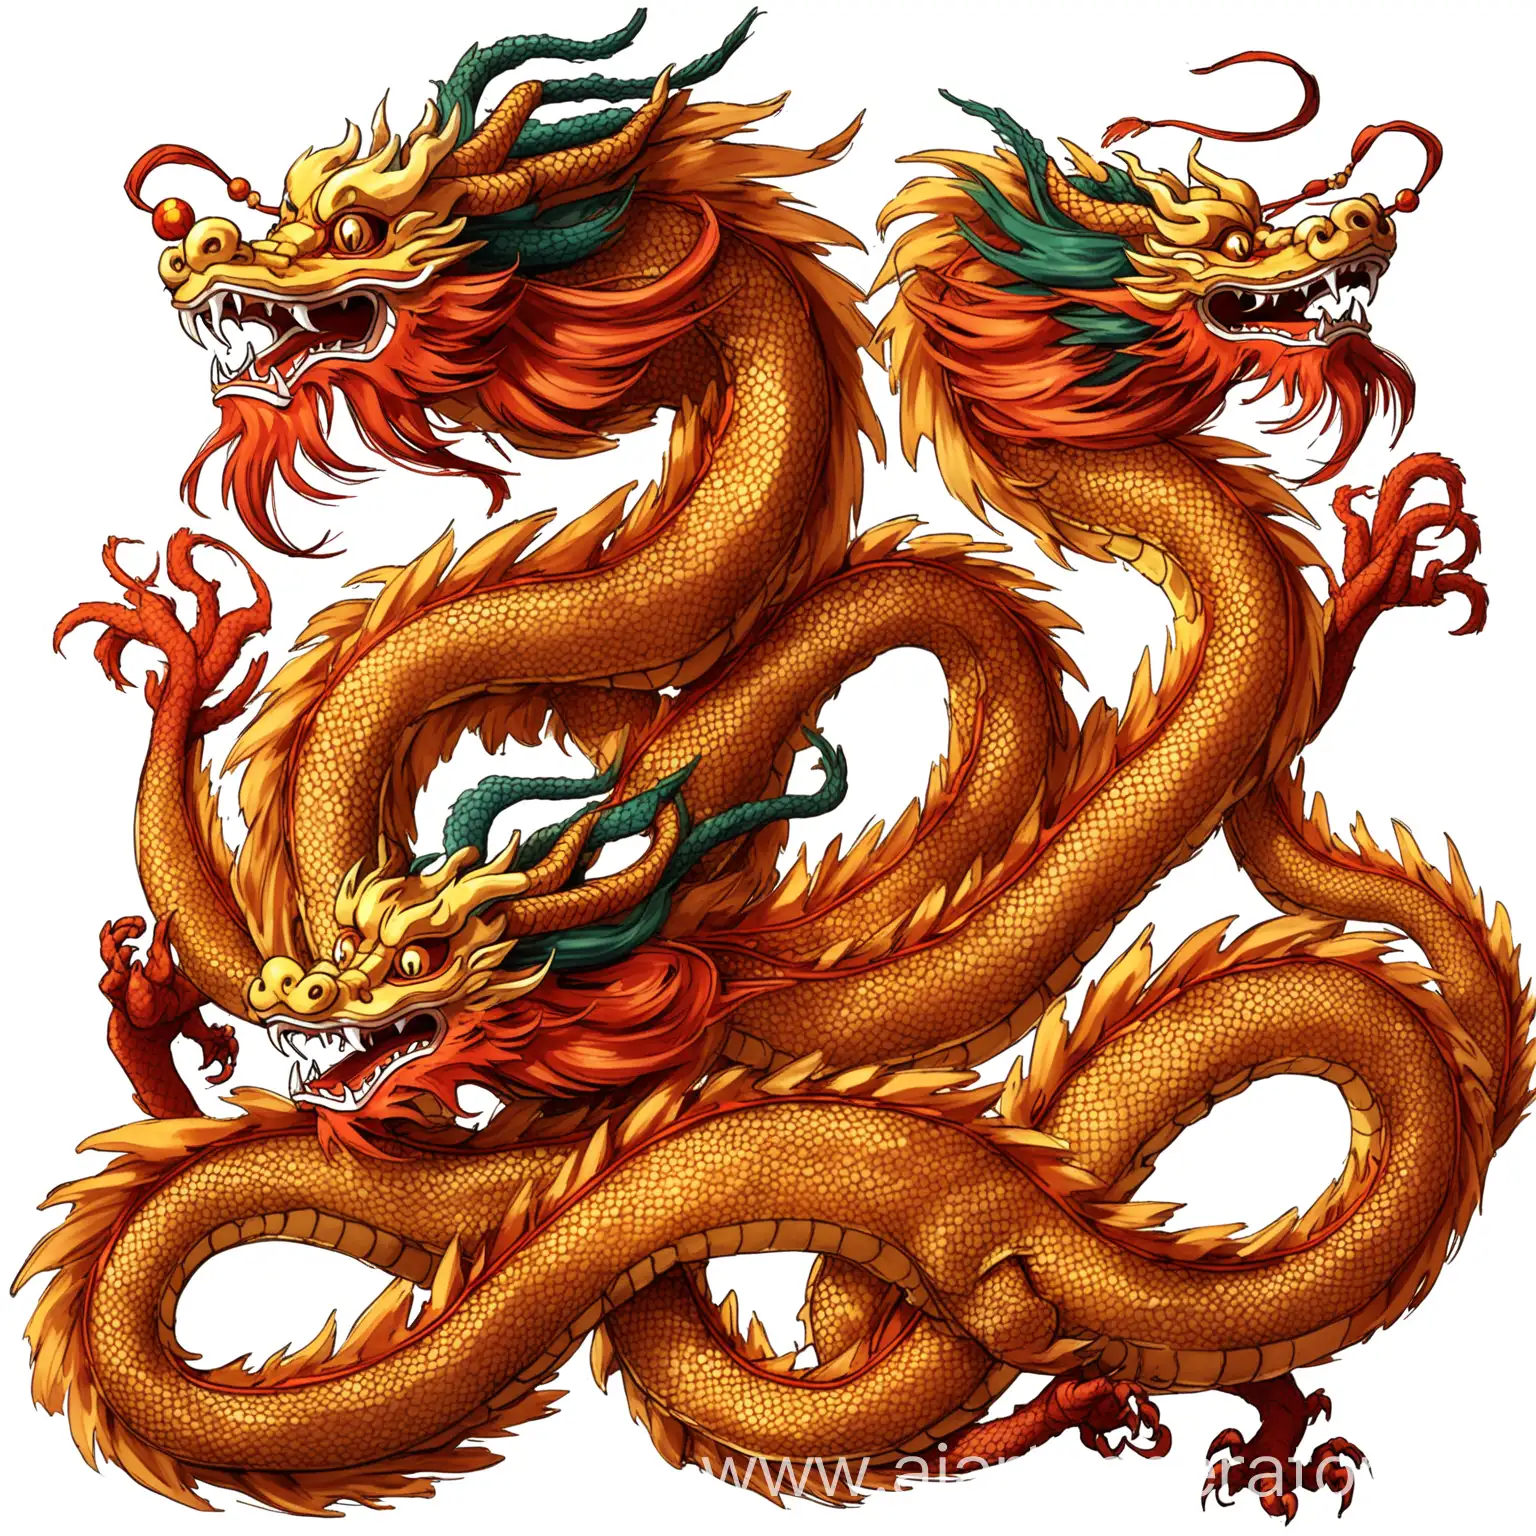 chinese dragons no background

